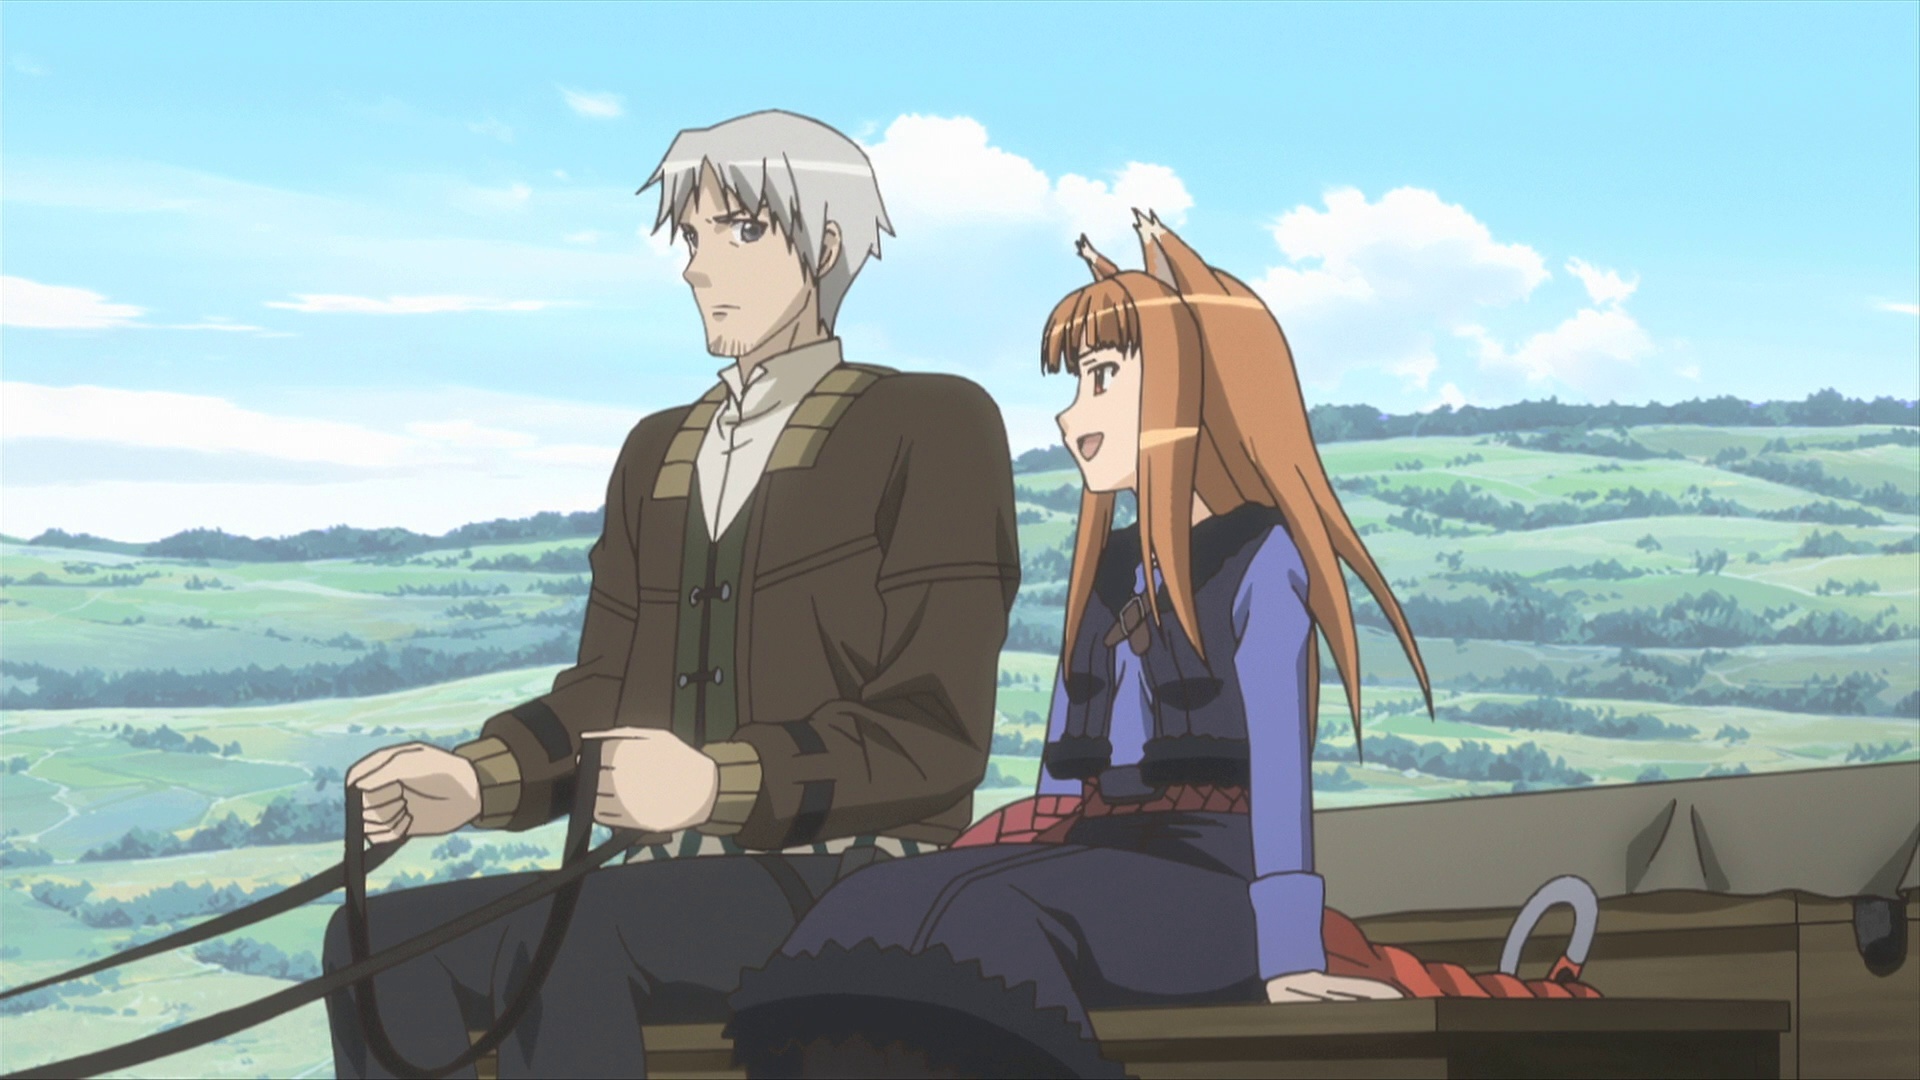 Spice and Wolf (Anime): Kraft Lawrence - the protagonist, Traveling together, Intimate moment. 1920x1080 Full HD Wallpaper.